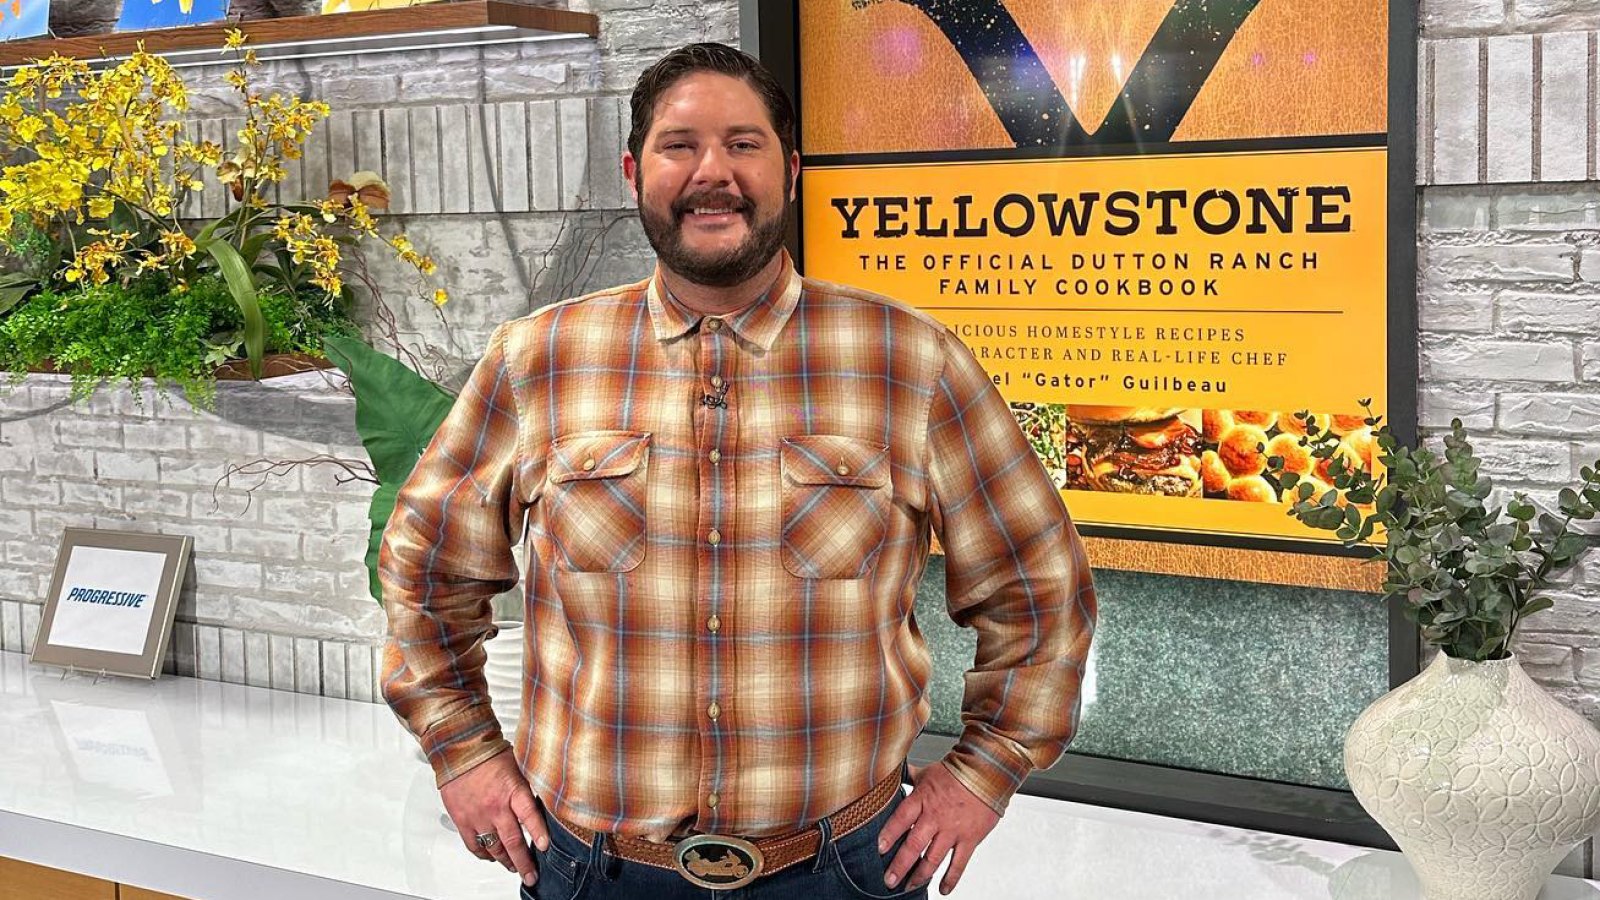 https://www.usmagazine.com/wp-content/uploads/2023/09/Yellowstone-Chef-Gator-Guilbeau-Shares-His-Recipe-for-Beth-and-Rips-Sweet-Blueberry-Cobbler-Promo-01.jpg?crop=0px%2C428px%2C1307px%2C739px&resize=1600%2C900&quality=86&strip=all